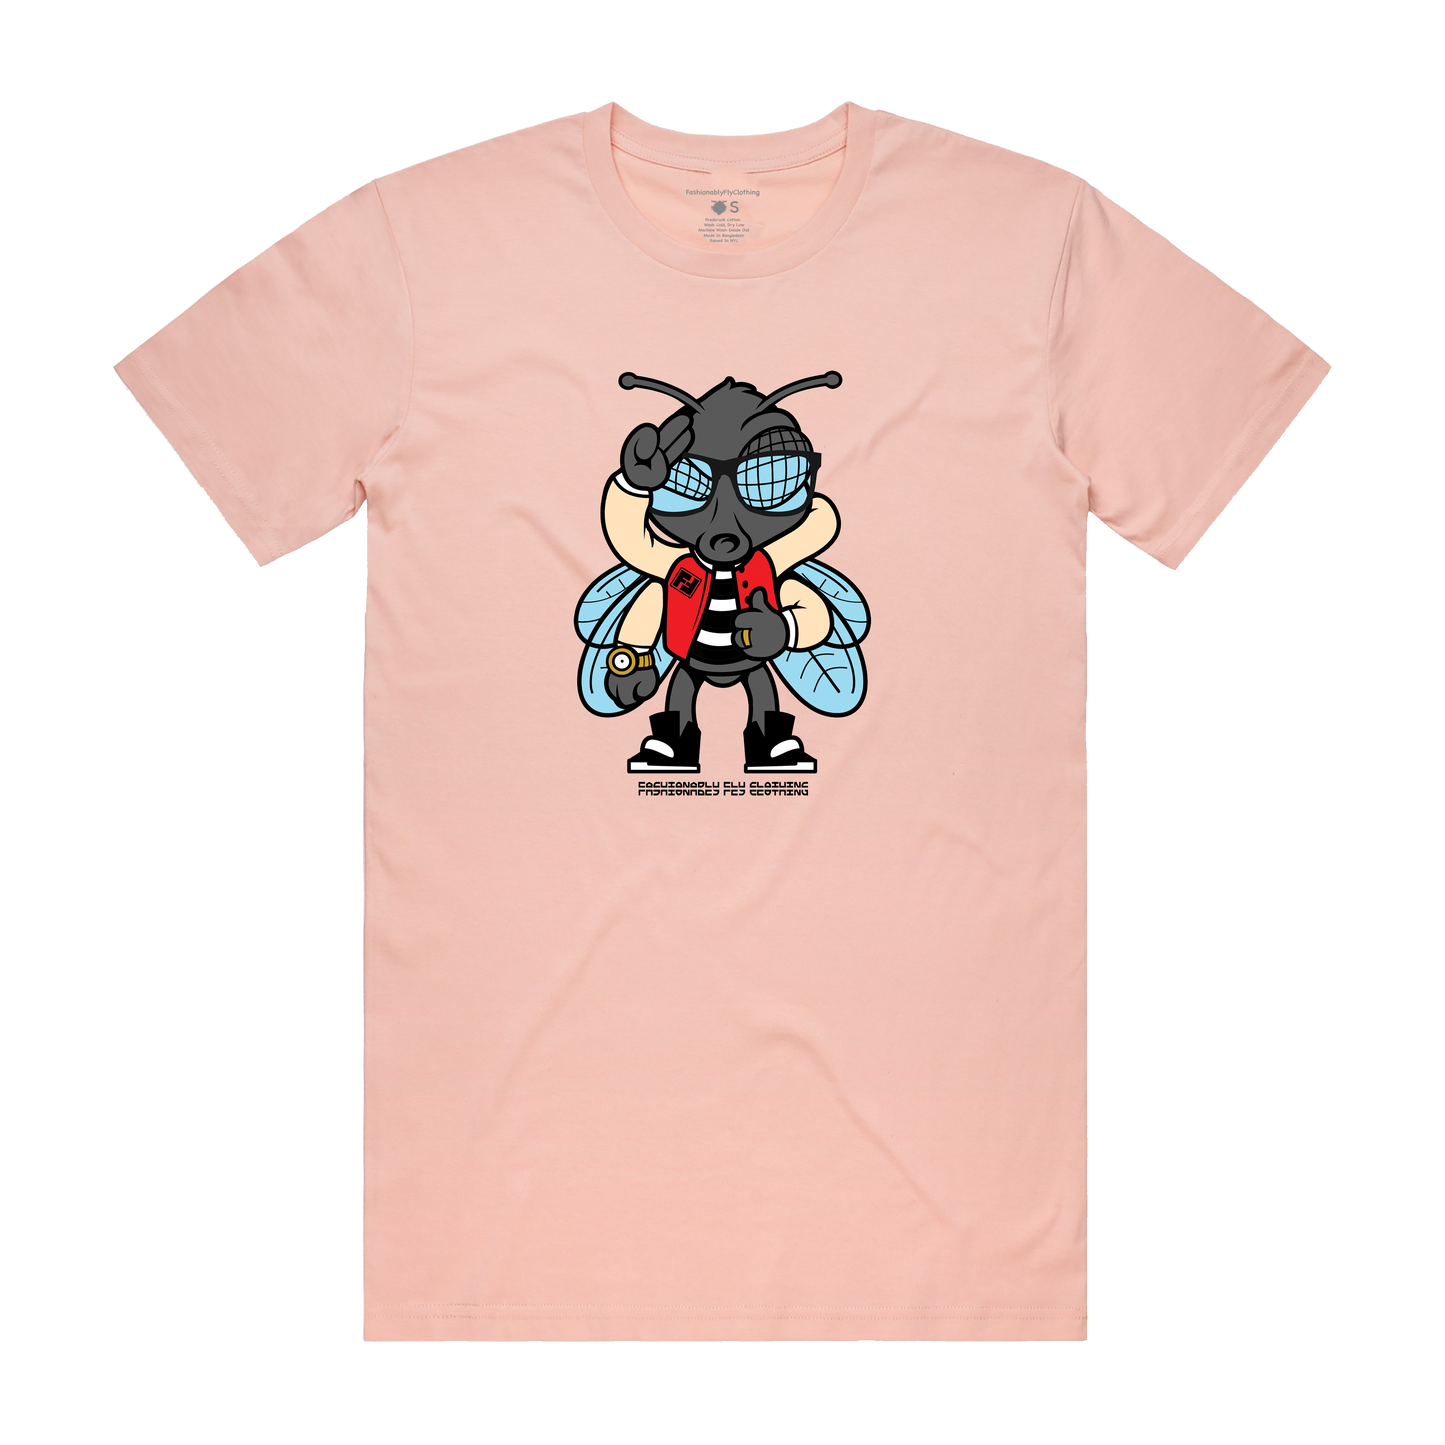 Fly Guy Unisex T-Shirt - Pale Pink